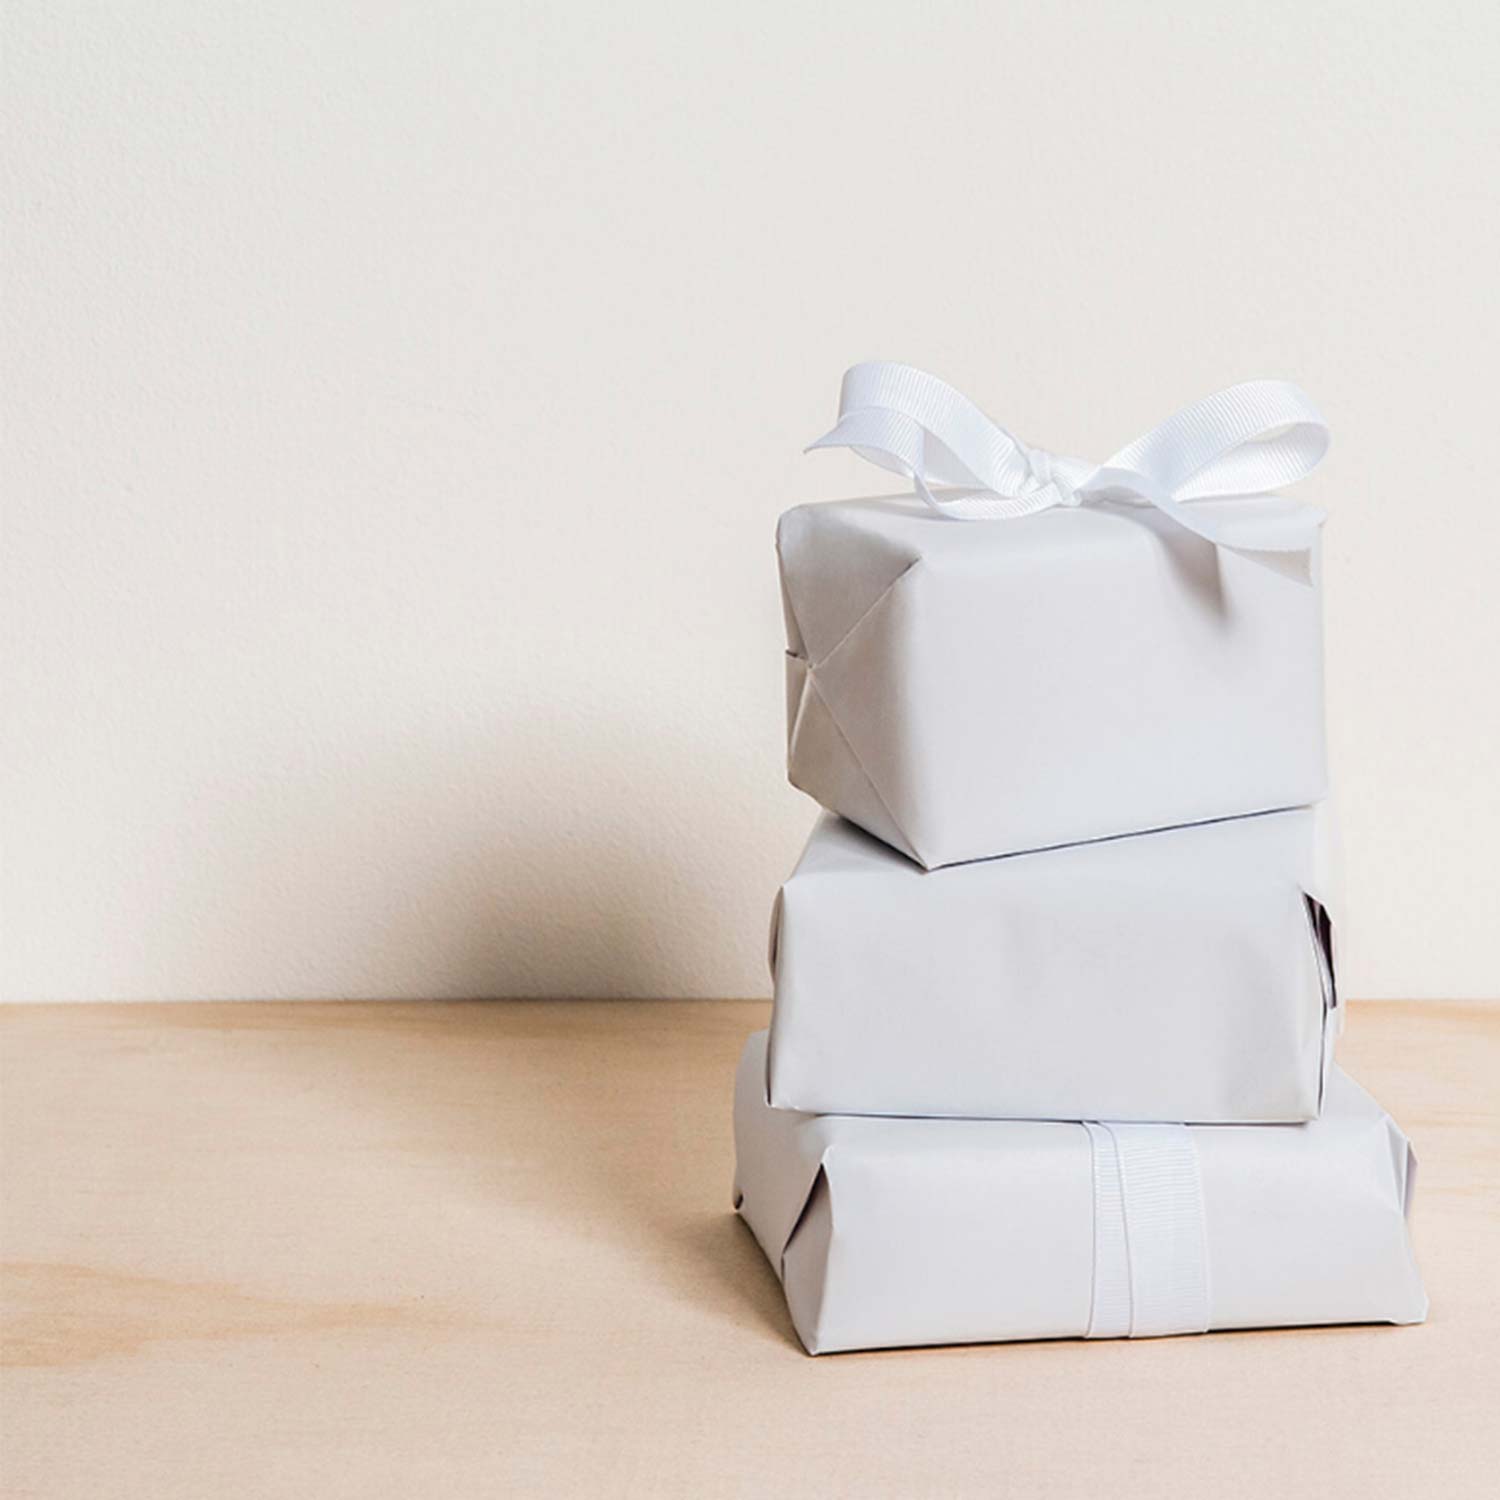 Why wrap your gifts this festive season? 